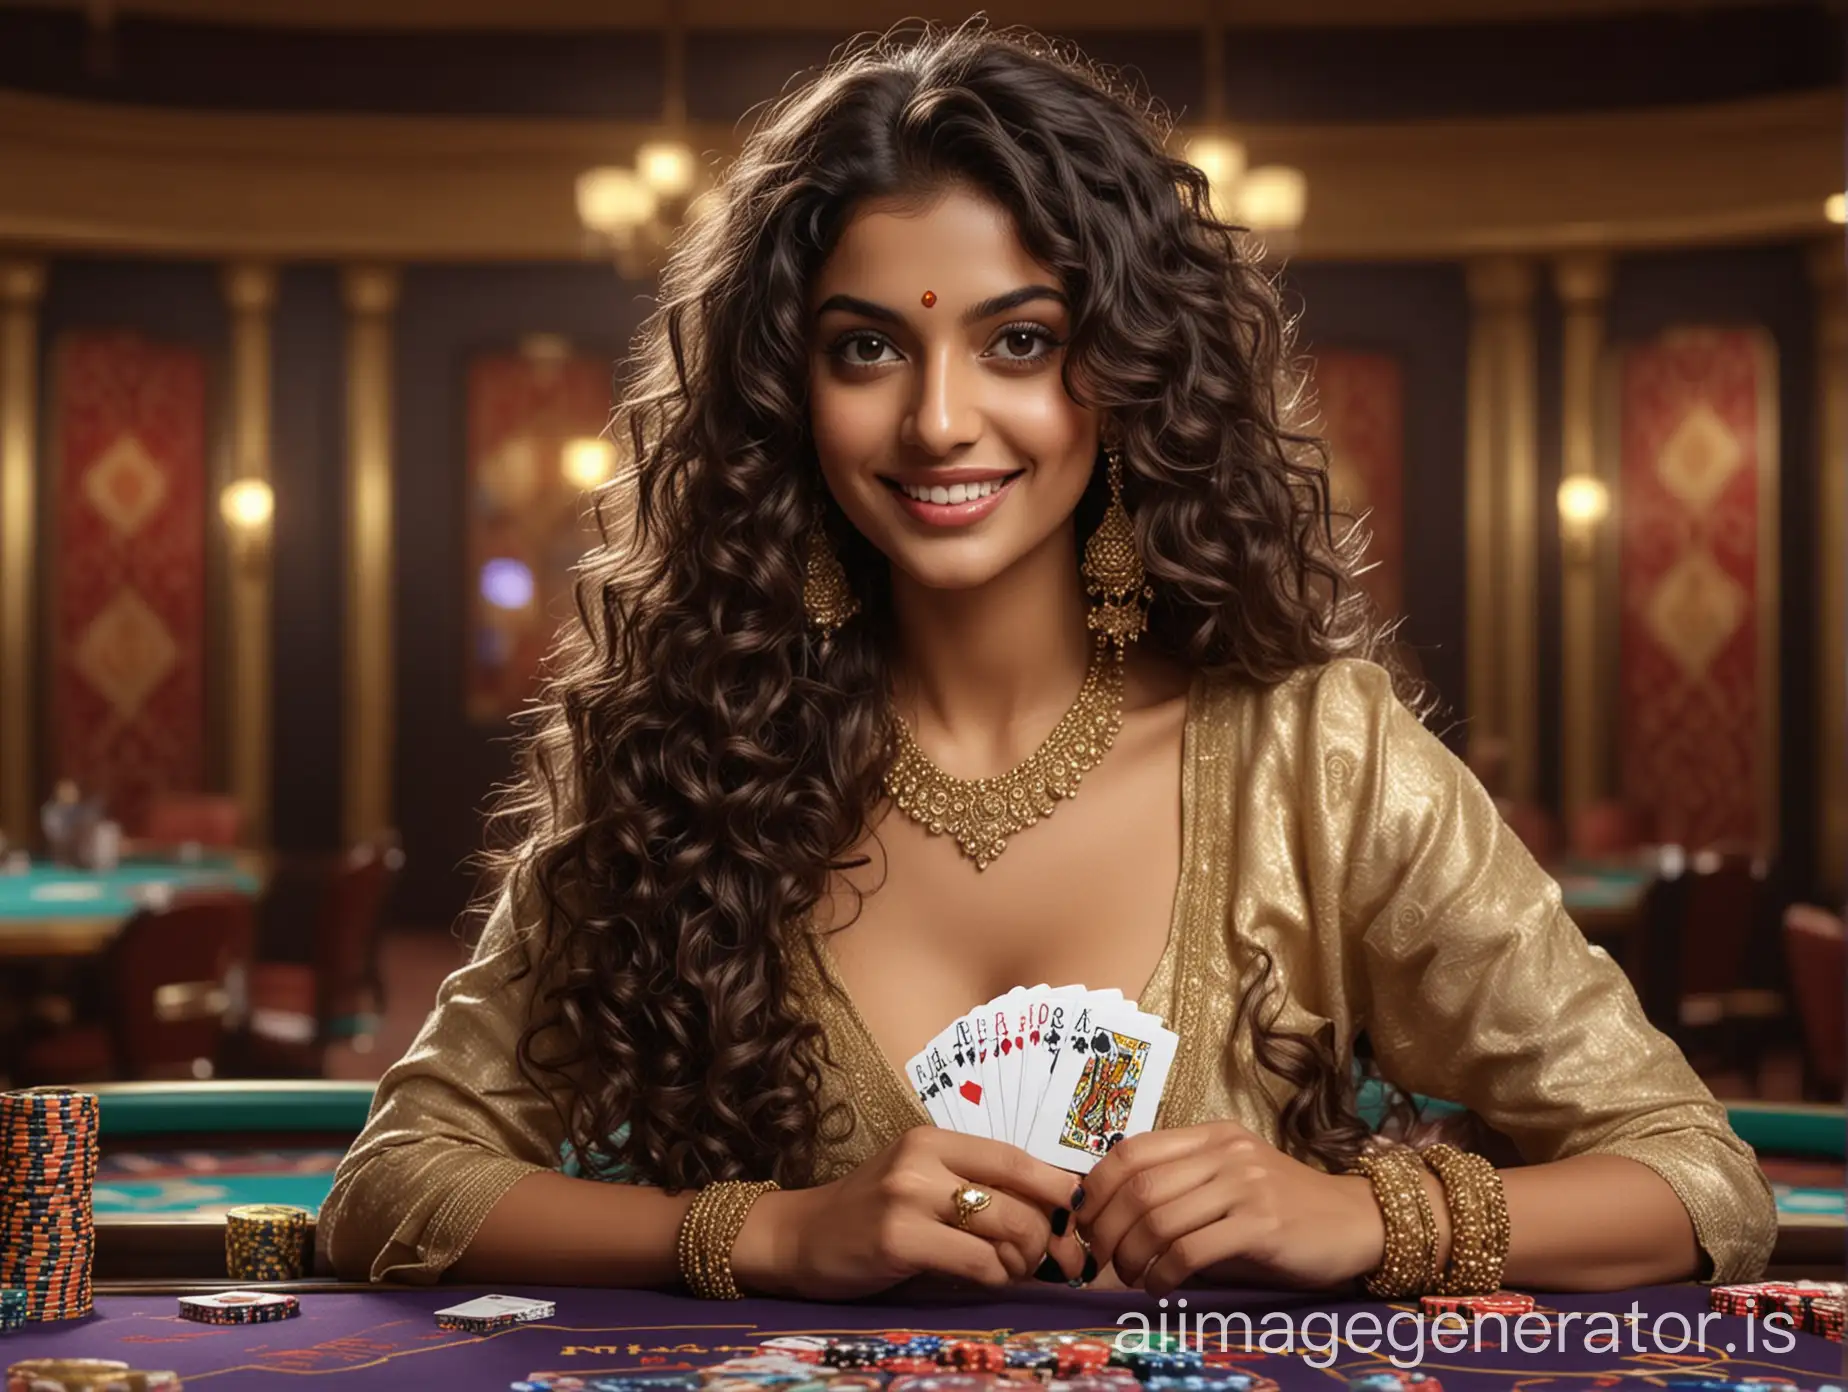 a stunning Indian beautiful model, with curly long hair, hair waves, black eyes, holding poker cards, a casino background, long golden nail, look up at the viewer,  a lot of bracelets, smile, 4k, an photorealistic, casino environment